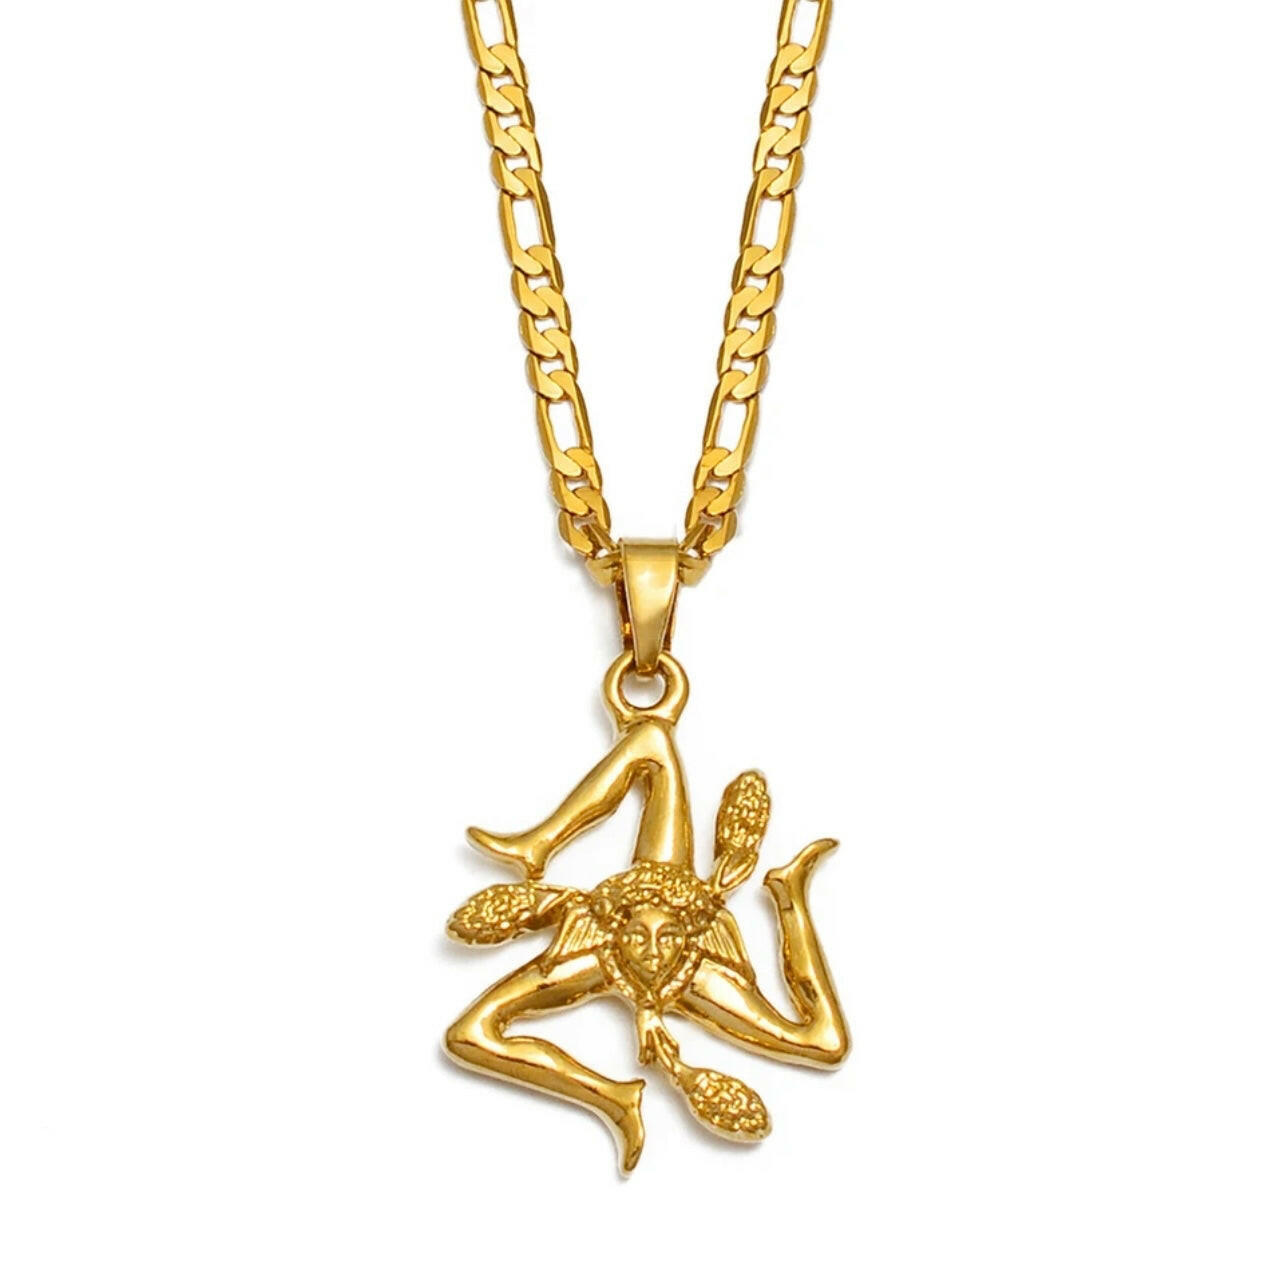 Gold Plated Sicilian Sicily Necklace.